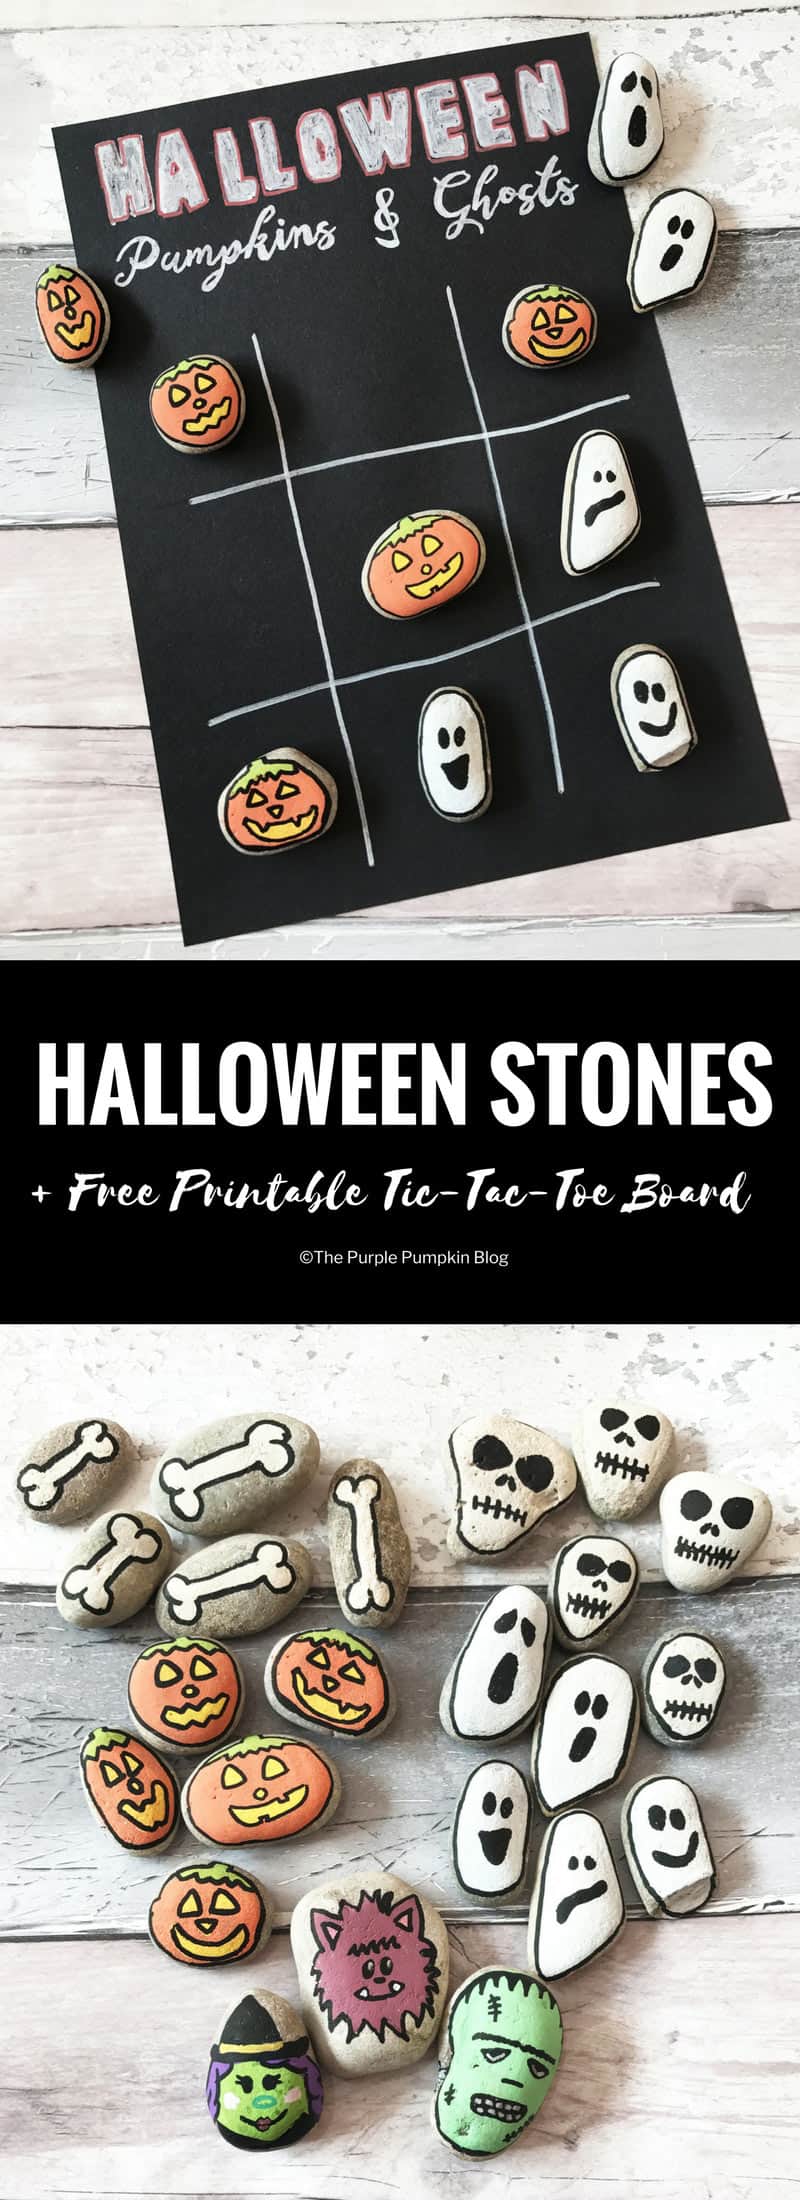 Halloween Stones: Tic-Tac-Toe. Paint stones with Halloween characters then use them to play Halloween Tic-Tac-Toe! A free printable is included in this blog post. (Plus TONS of awesome #Halloween ideas and #FreePrintables!)